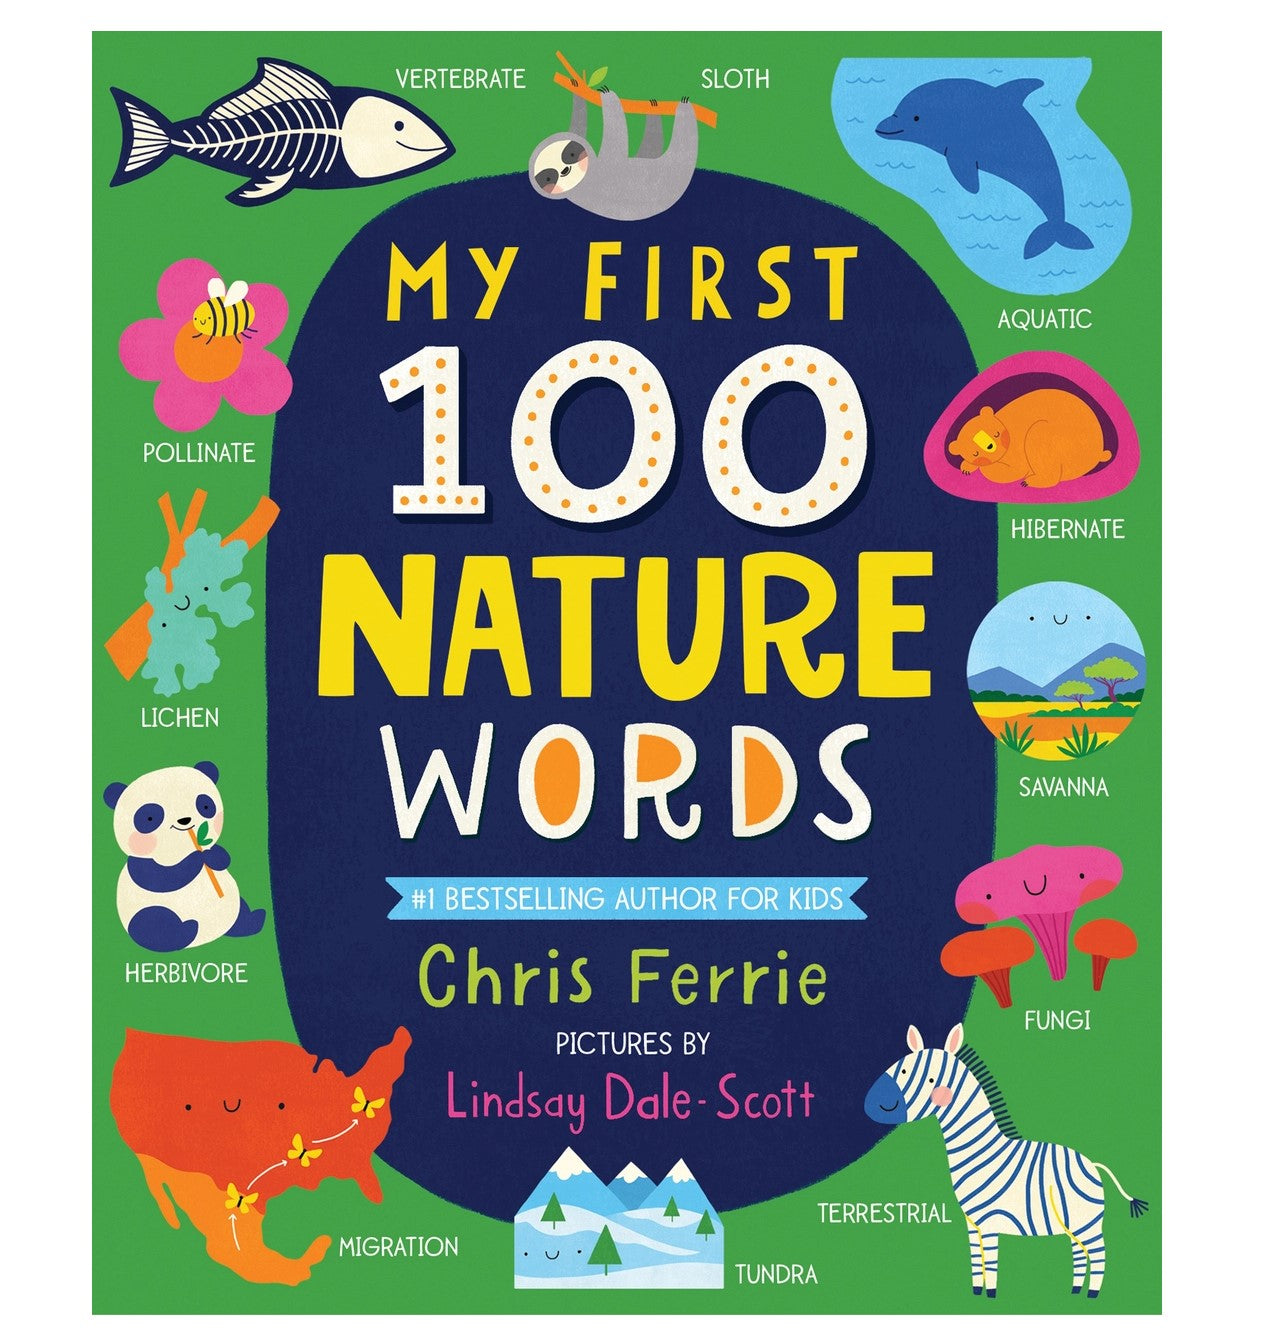 My 1st 100 Nature Words Book